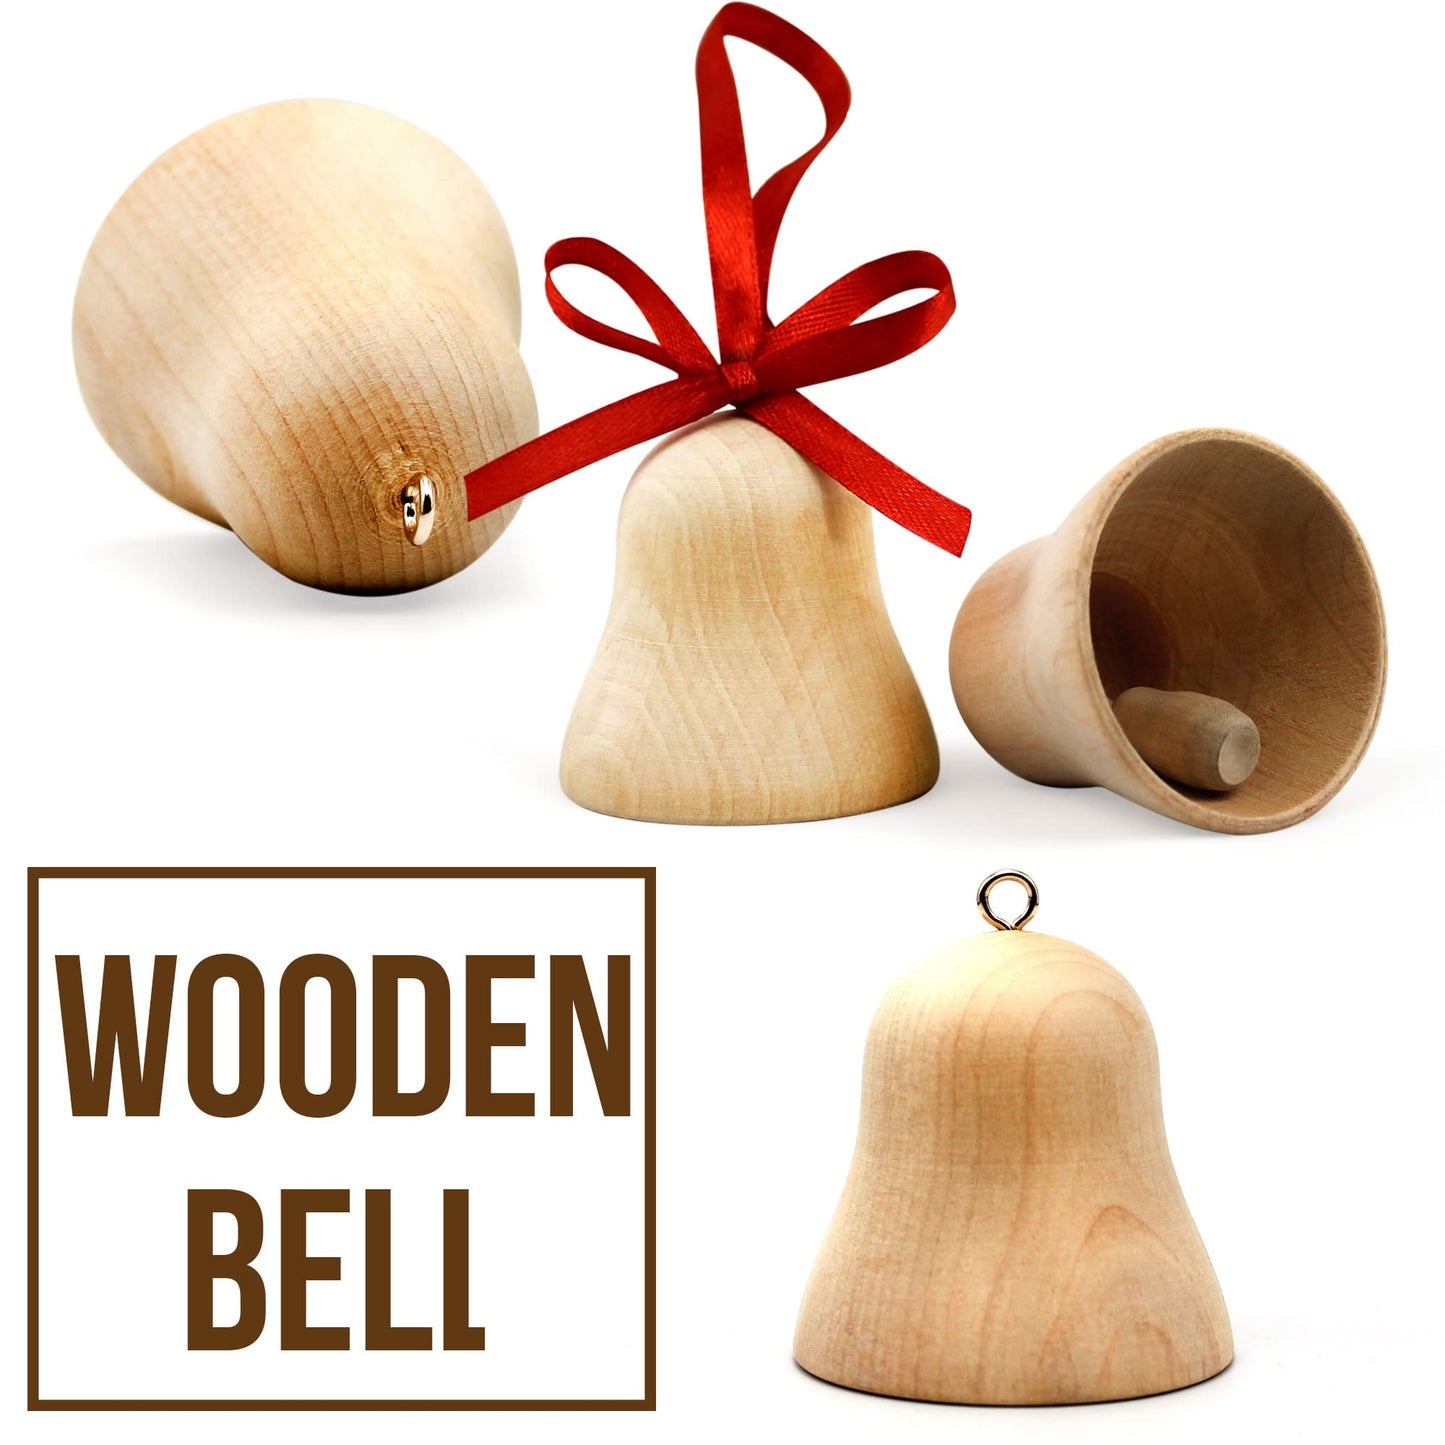 Wooden Christmas Ornaments to Paint Set of 6 pcs - DIY Blank Christmas Bells for Crafts Hanging Christmas Tree Decorations - Unfinished Wood Crafts